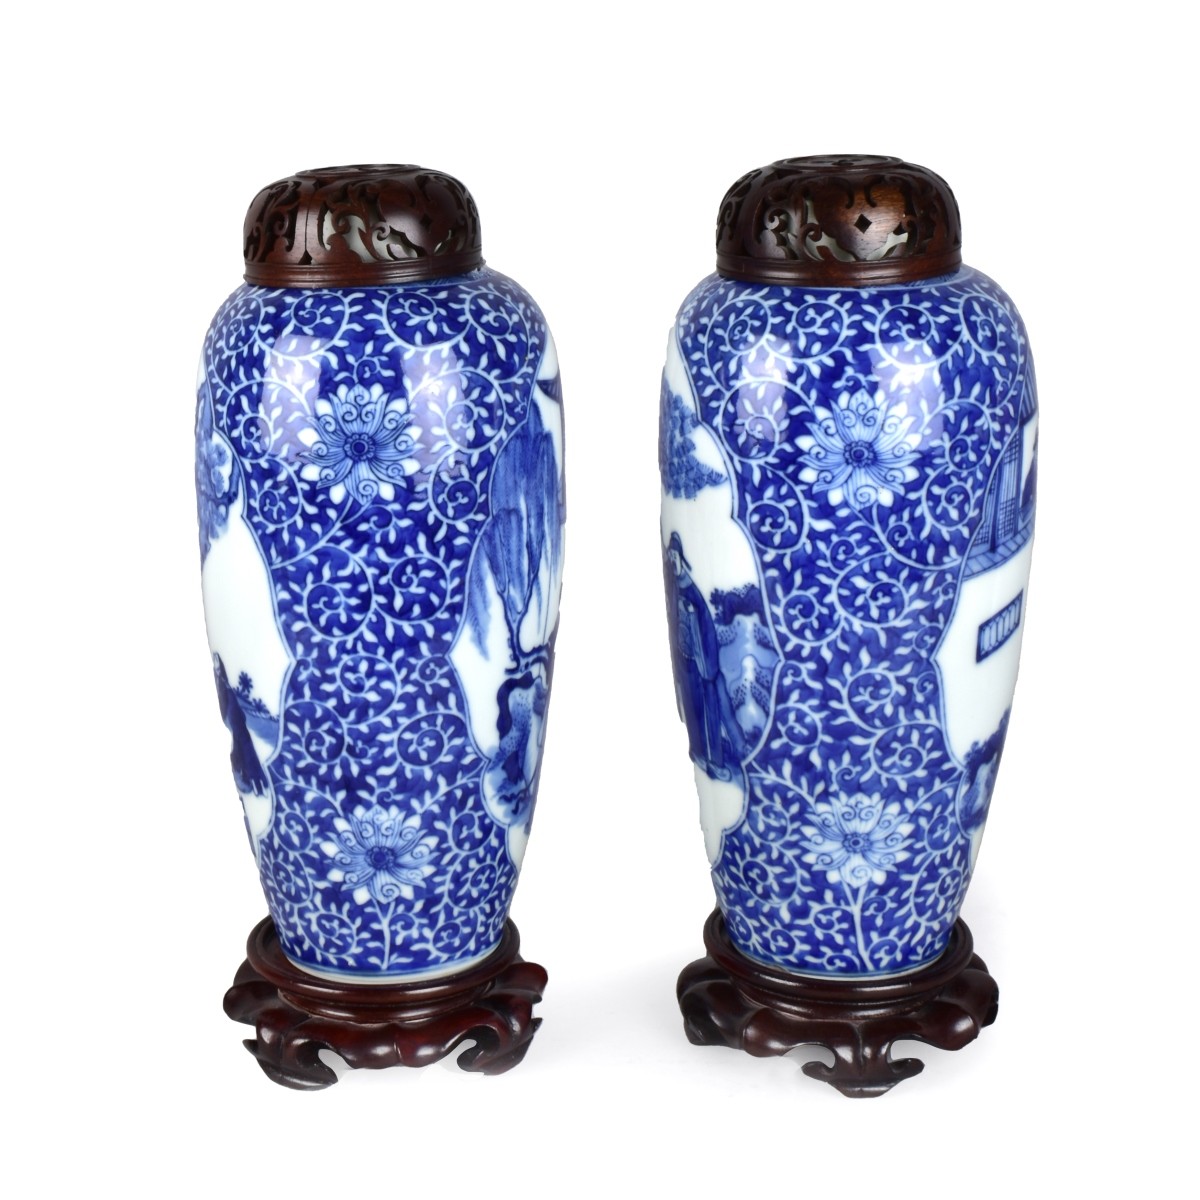 Pair of Chinese Covered Vases